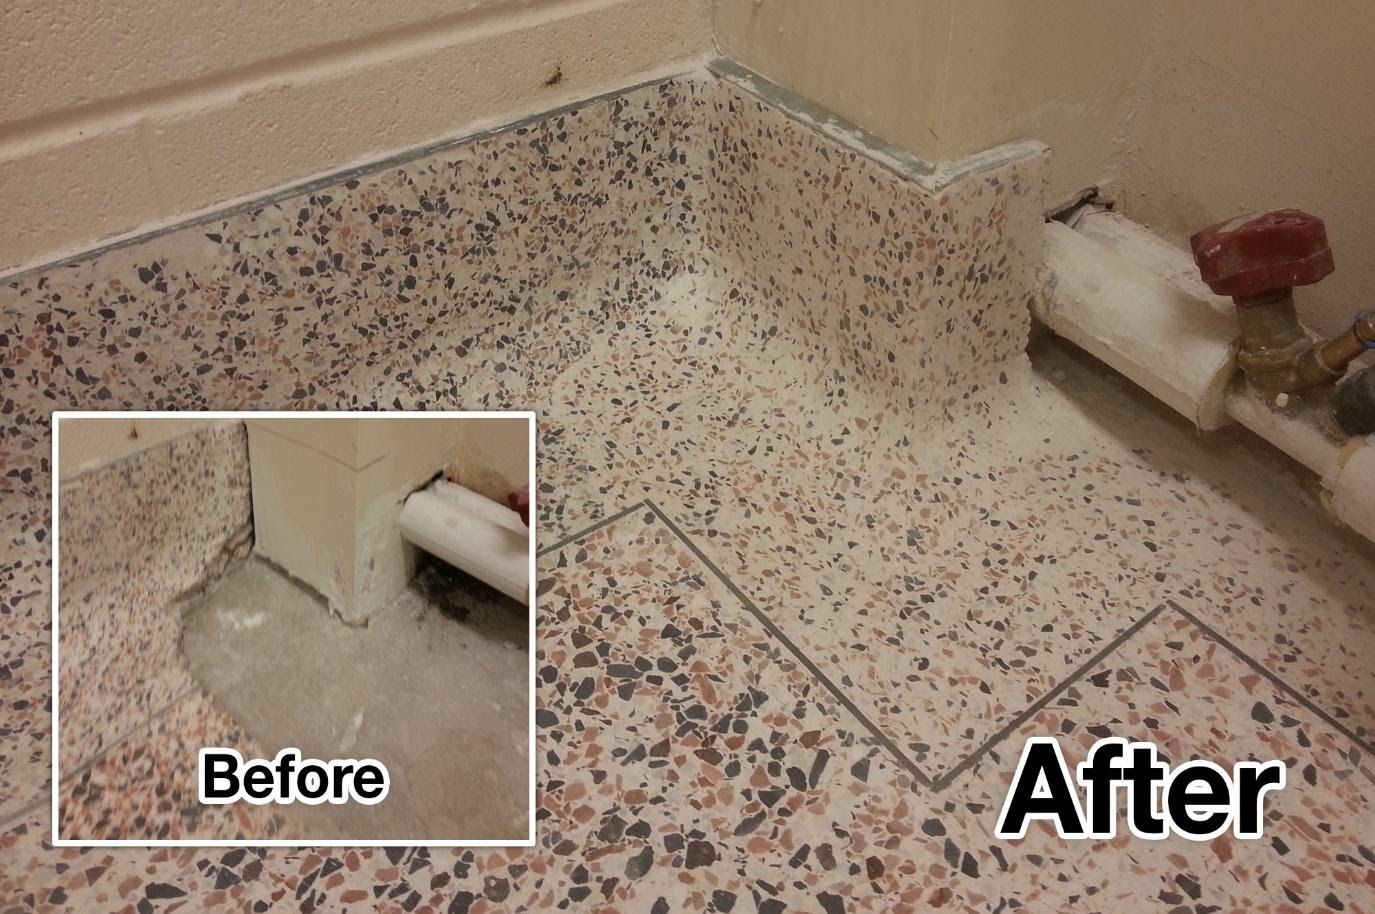 These tips will increase the lifespan of your floor tiles